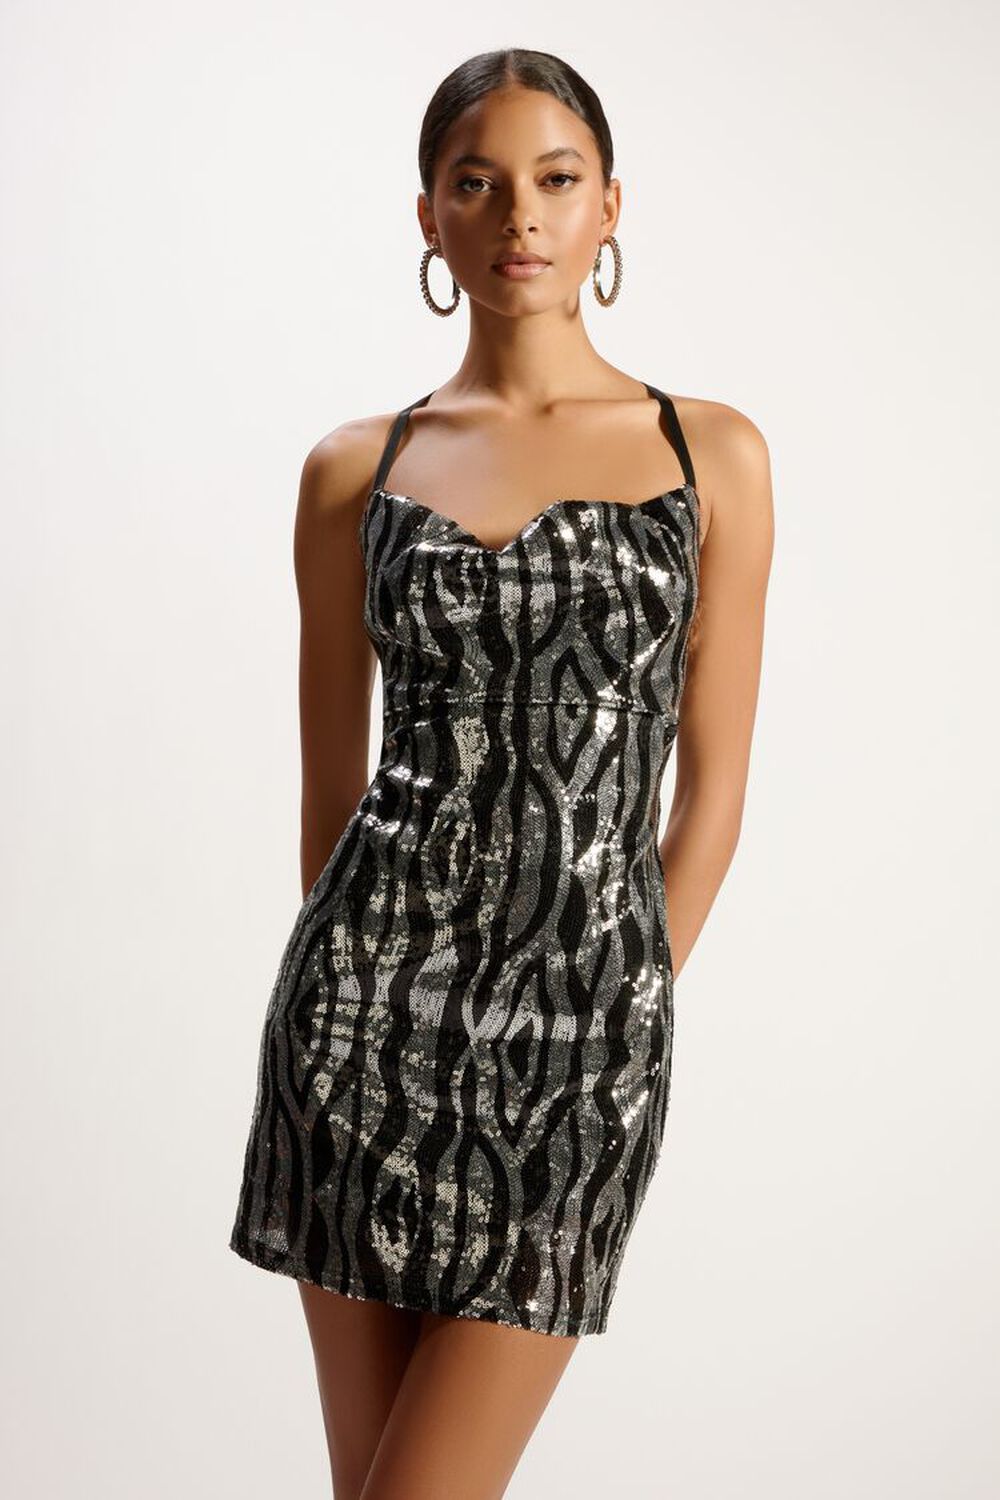 BLACK/SILVER Sequin Abstract Mini Dress, image 1